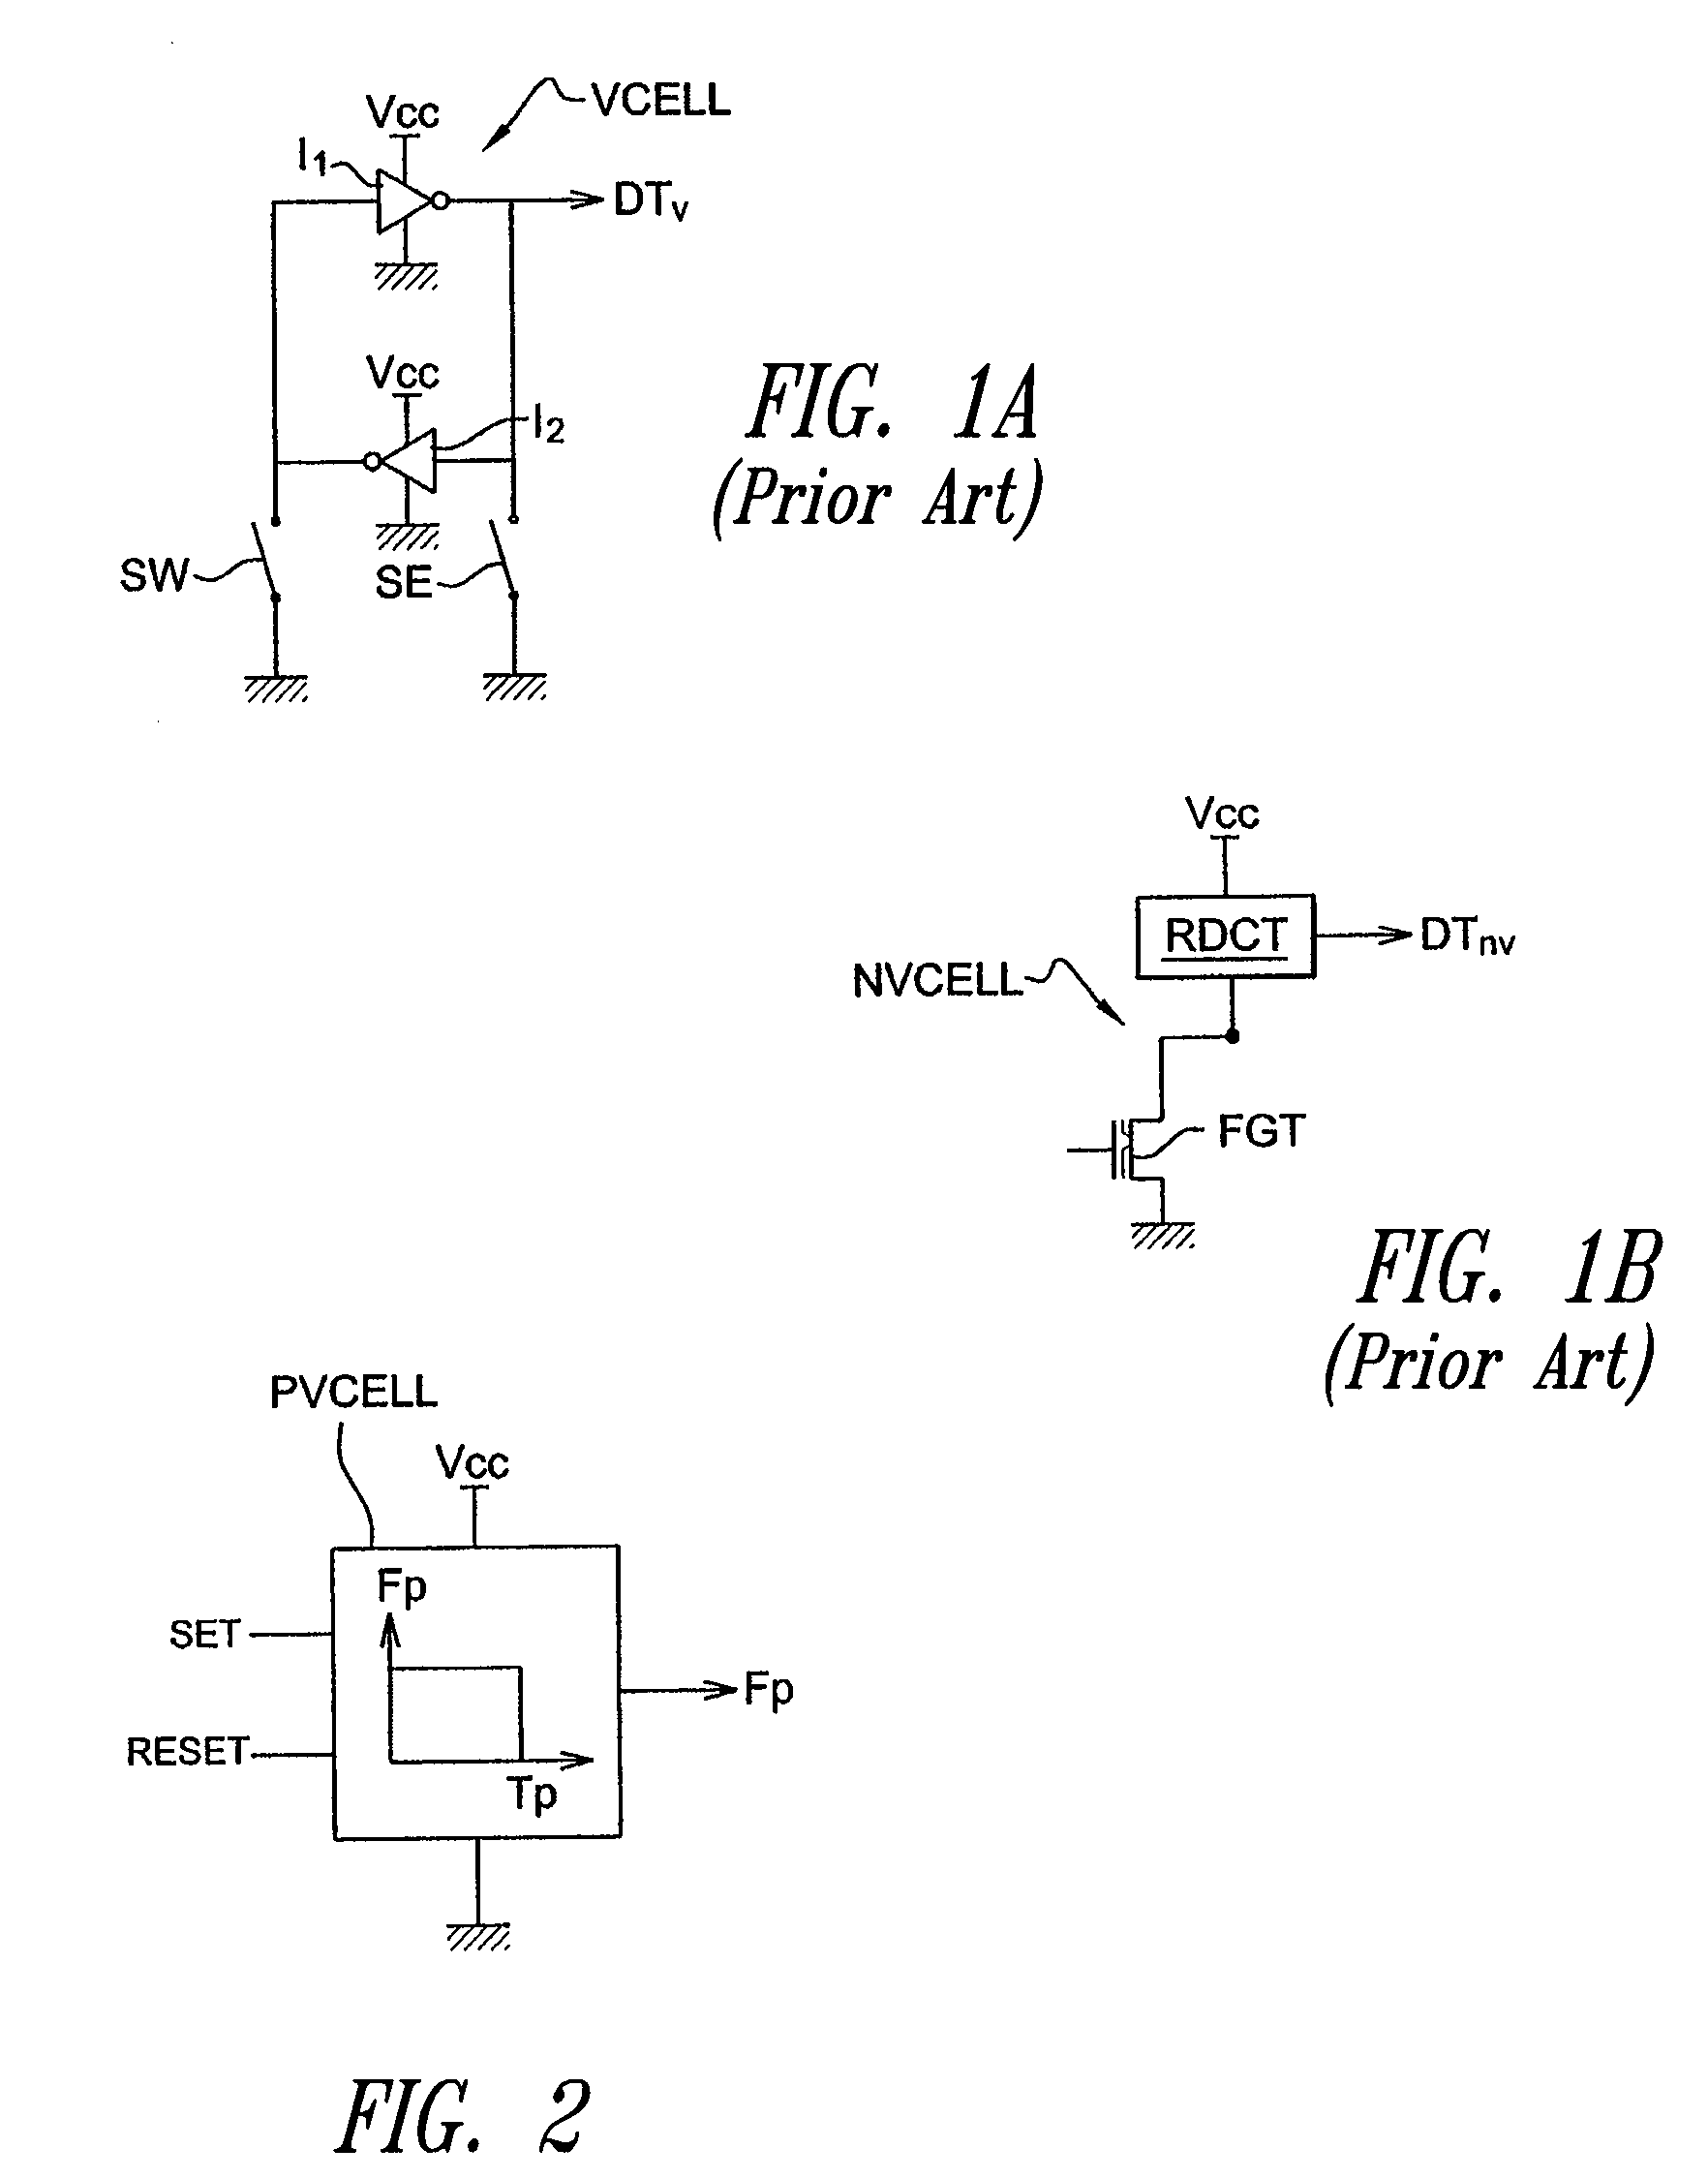 Persistent volatile memory with sense amplifier and discharge switch